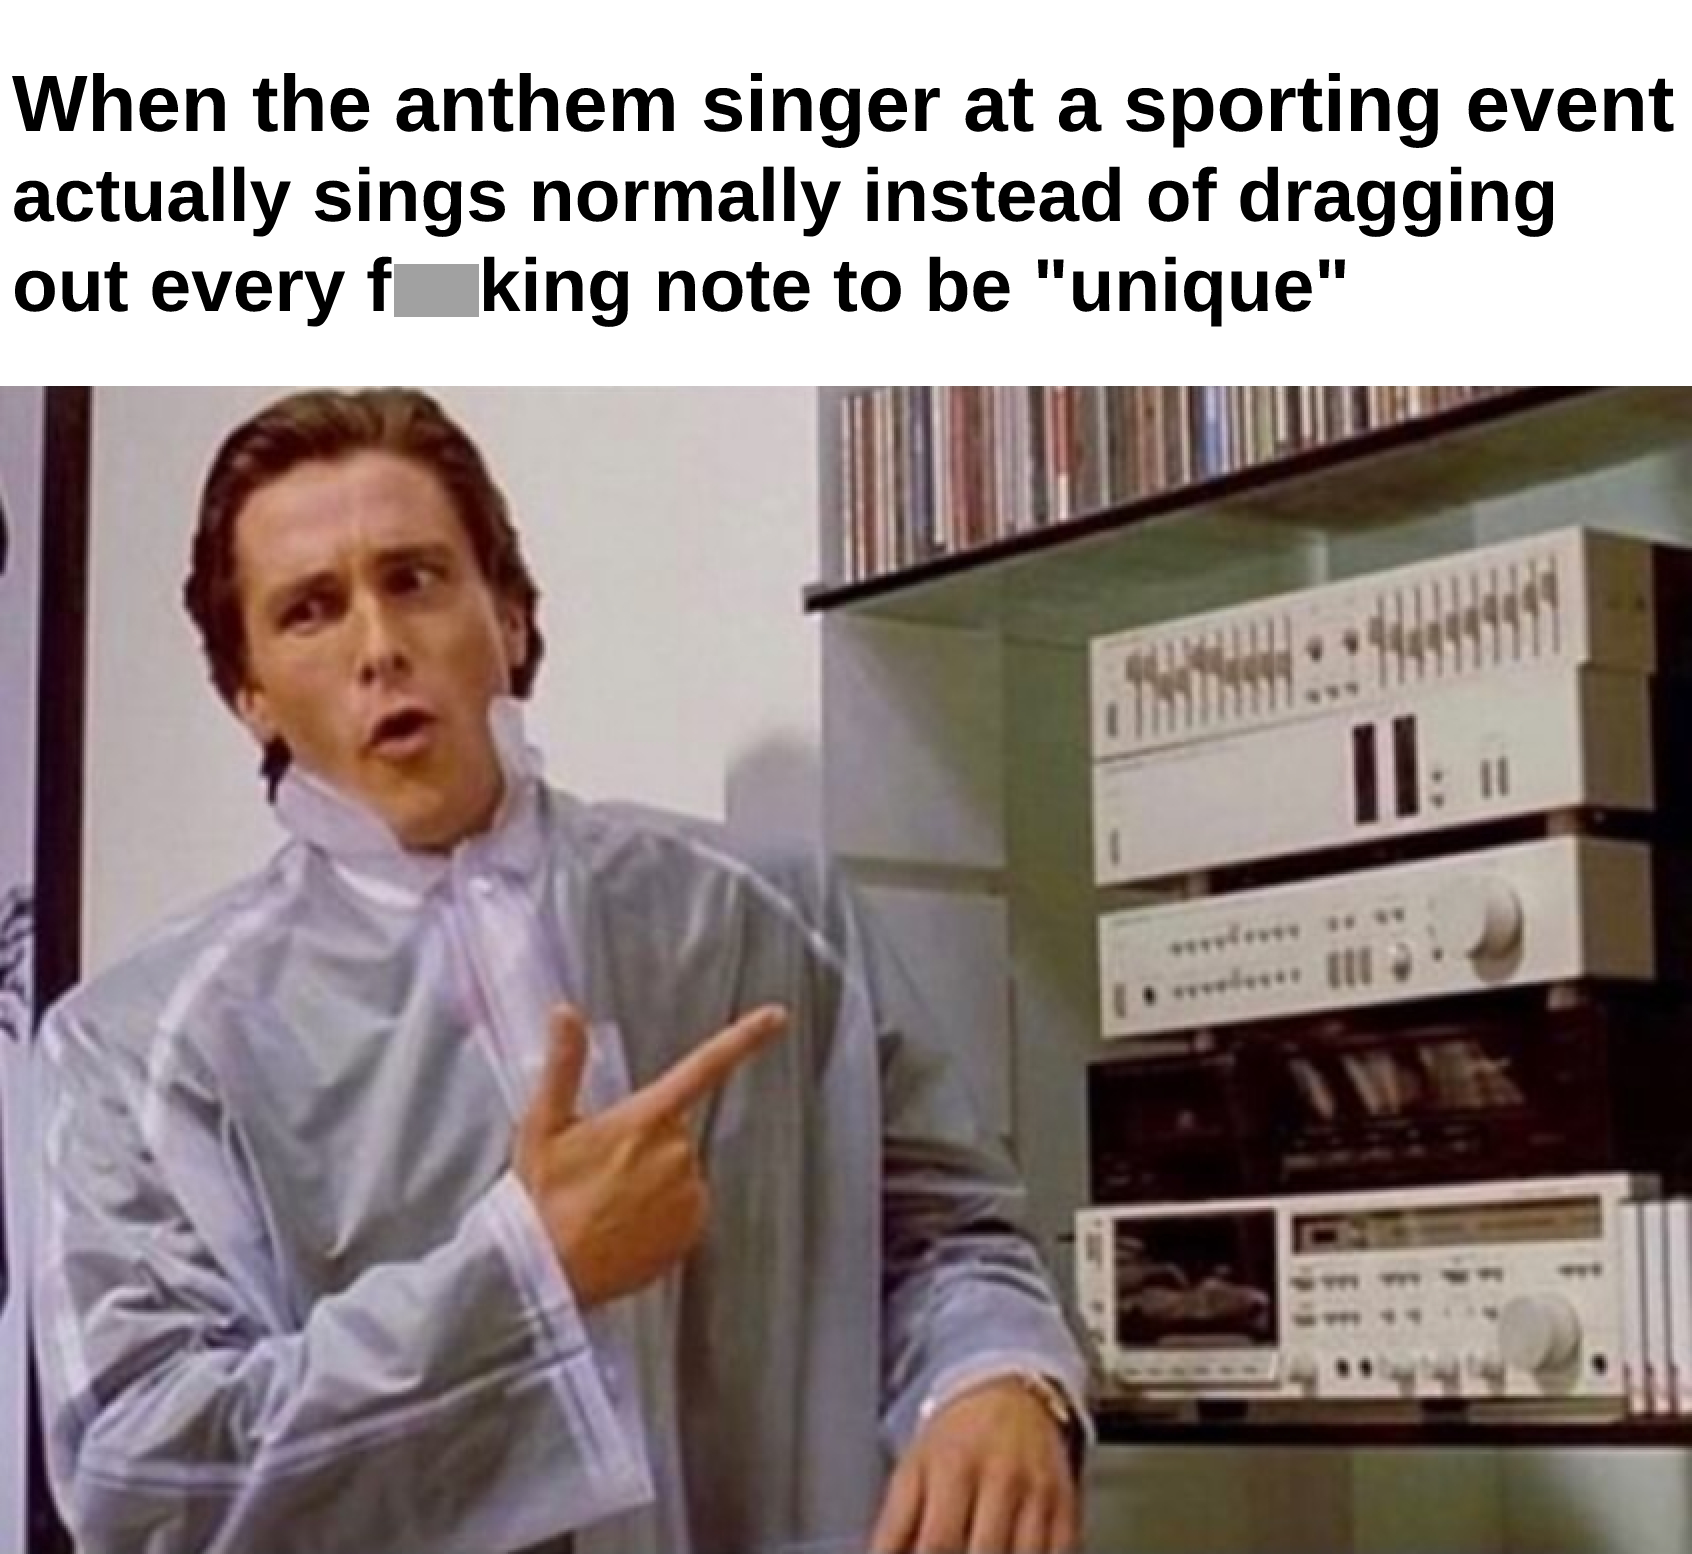 dank memes -  beatles fans when the worst song you ve ever heard comes on - When the anthem singer at a sporting event actually sings normally instead of dragging out every f king note to be "unique" 11 11